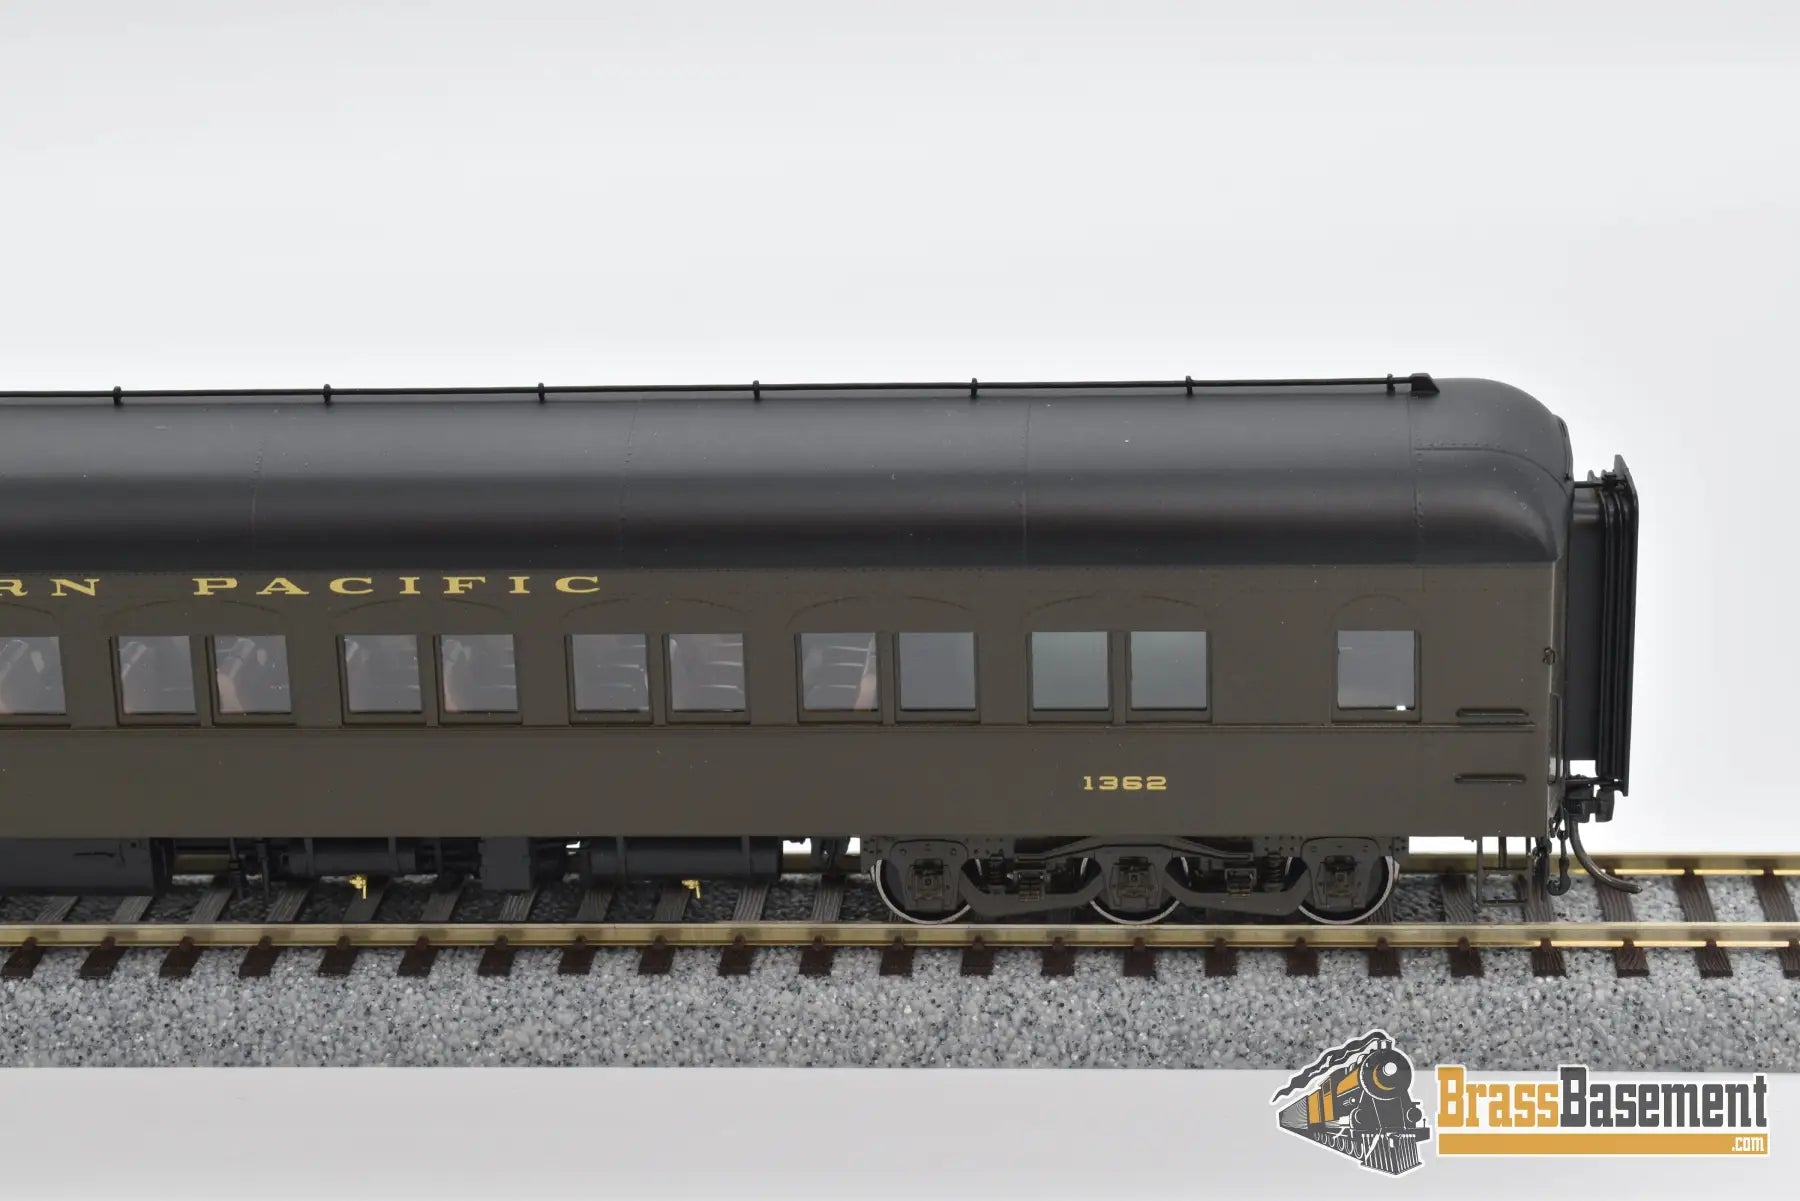 Ho Brass - W&R Northern Pacific Deluxe Coach #1362 Pullman Green Passenger